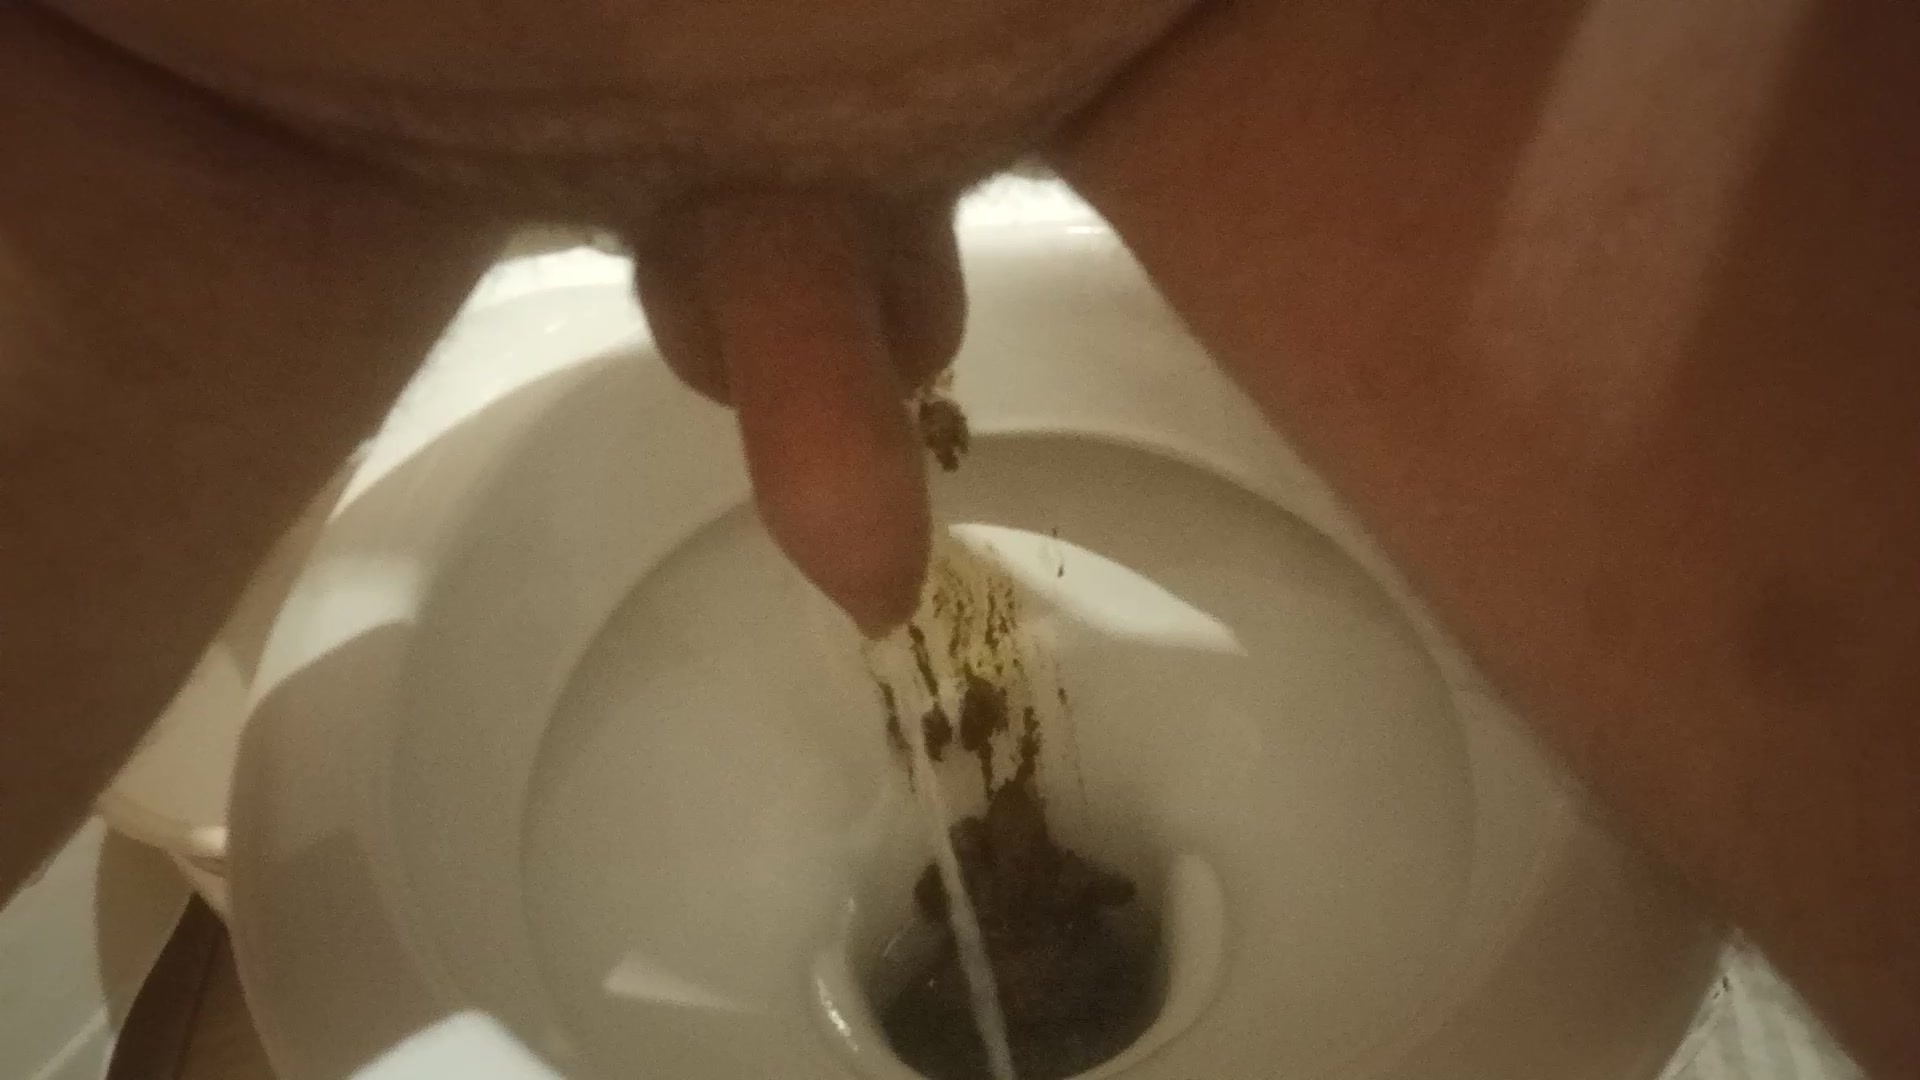 my evening shitting and pissing in toilet